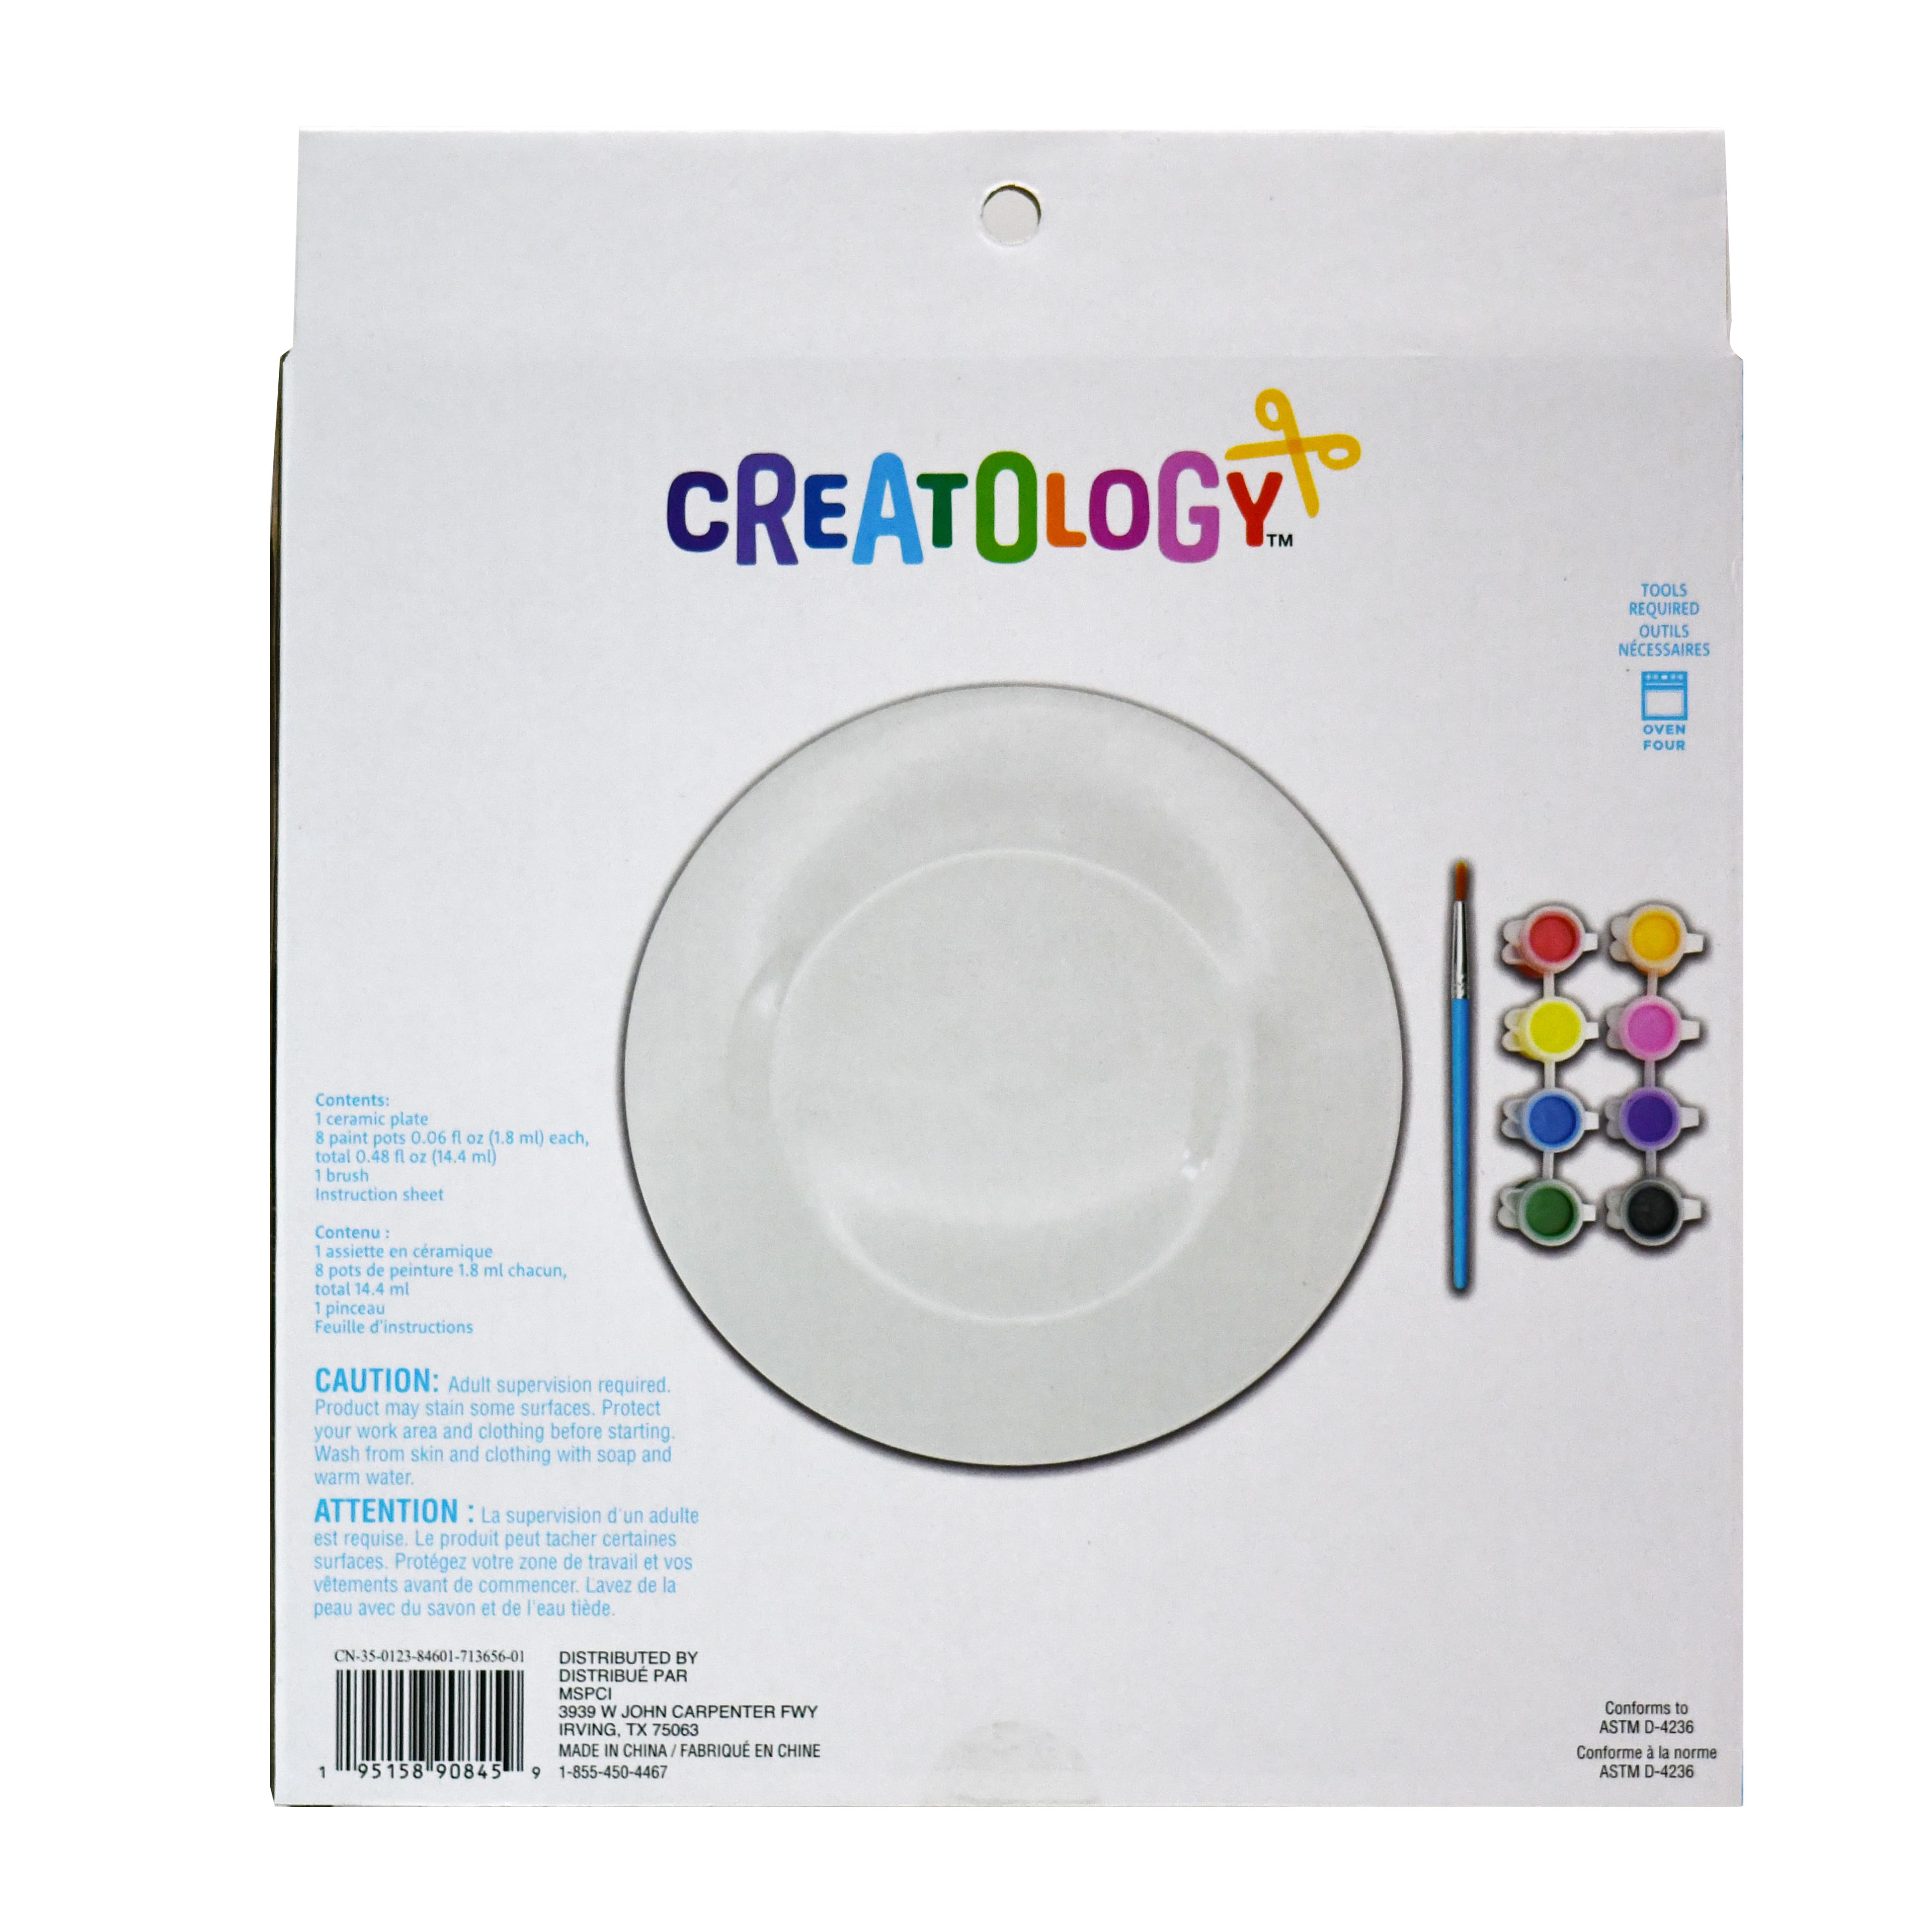 What is Art & Craft Painting DIY Ceramic Painting Kit for Kids Paint Your  Own Plate